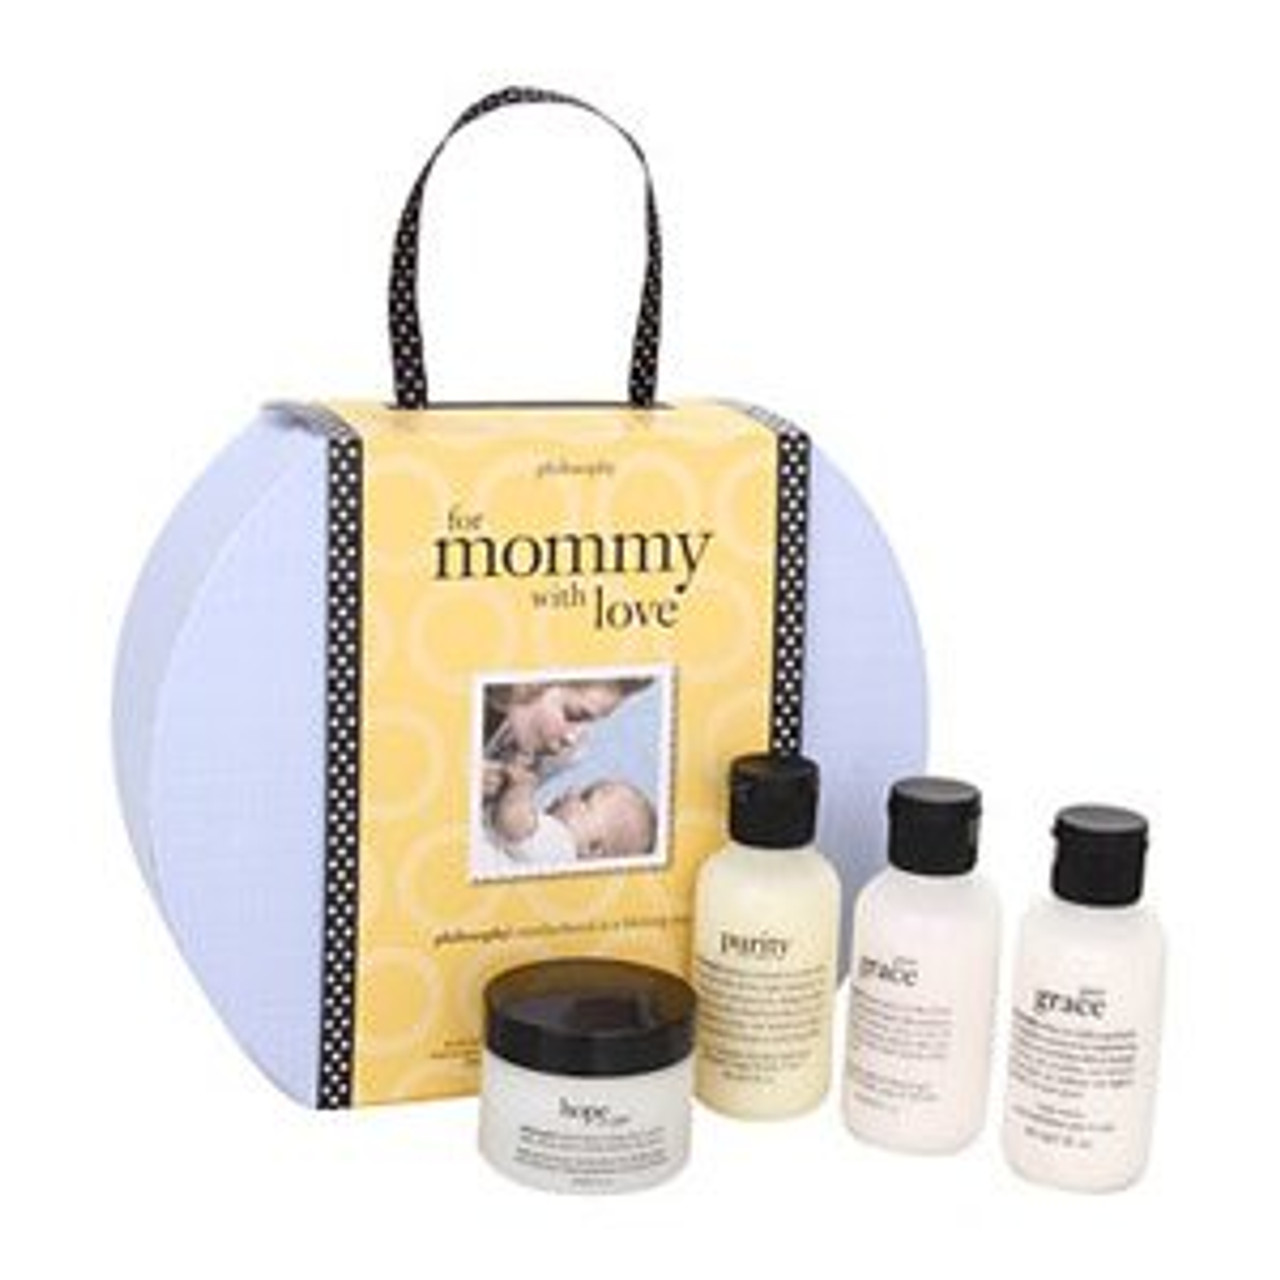 Philosophy For Mommy with Love Gift Set 4 pcs ® on Sale